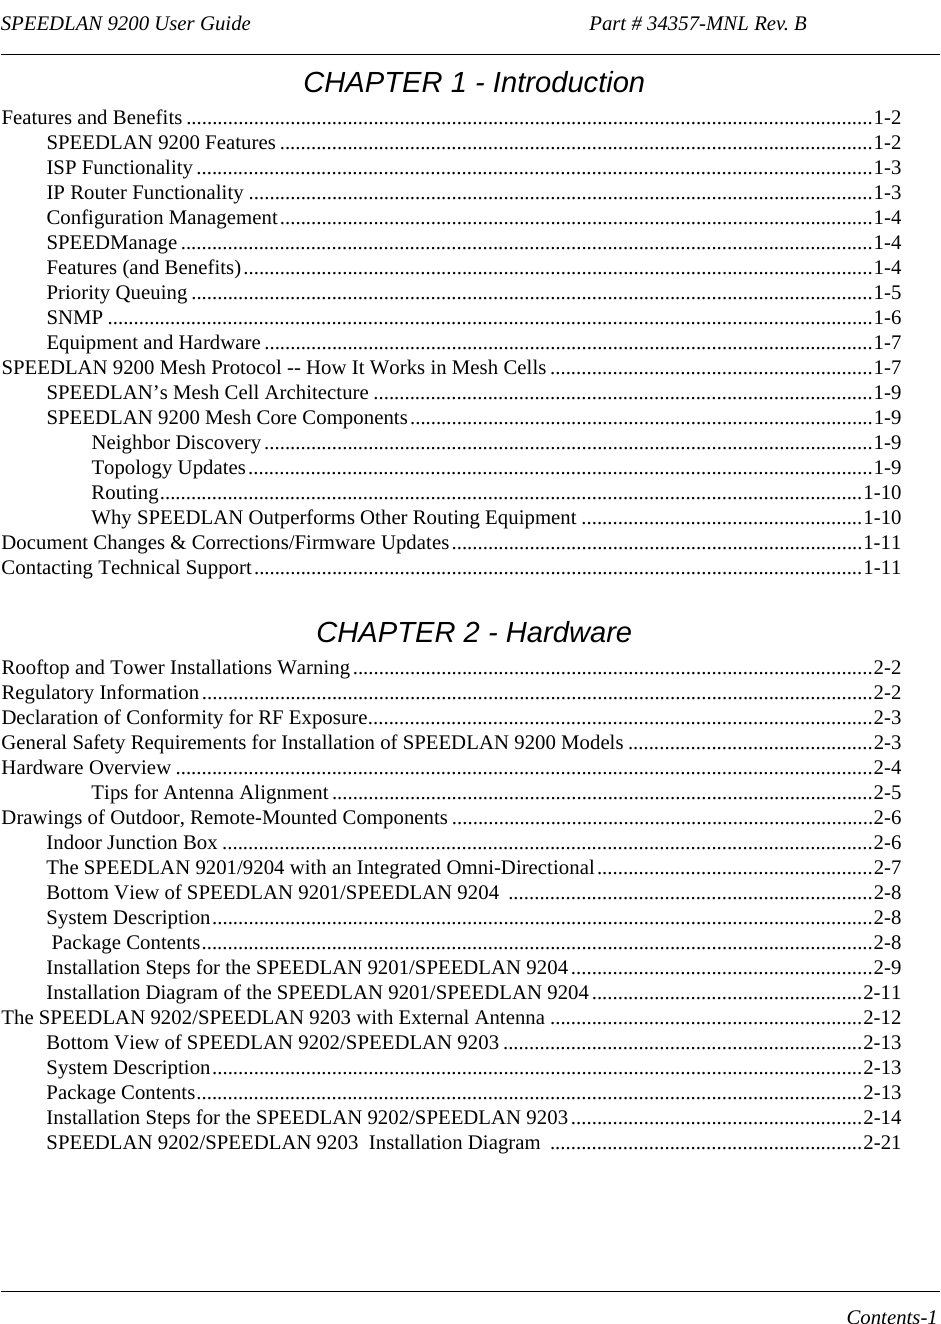 SPEEDLAN 9200 User Guide                                                                 Part # 34357-MNL Rev. B      Contents-1                                                                                                                                                                        CHAPTER 1 - IntroductionFeatures and Benefits ....................................................................................................................................1-2SPEEDLAN 9200 Features ..................................................................................................................1-2ISP Functionality ..................................................................................................................................1-3IP Router Functionality ........................................................................................................................1-3Configuration Management..................................................................................................................1-4SPEEDManage .....................................................................................................................................1-4Features (and Benefits).........................................................................................................................1-4Priority Queuing ...................................................................................................................................1-5SNMP ...................................................................................................................................................1-6Equipment and Hardware .....................................................................................................................1-7SPEEDLAN 9200 Mesh Protocol -- How It Works in Mesh Cells ..............................................................1-7SPEEDLAN’s Mesh Cell Architecture ................................................................................................1-9SPEEDLAN 9200 Mesh Core Components.........................................................................................1-9Neighbor Discovery.....................................................................................................................1-9Topology Updates........................................................................................................................1-9Routing.......................................................................................................................................1-10Why SPEEDLAN Outperforms Other Routing Equipment ......................................................1-10Document Changes &amp; Corrections/Firmware Updates...............................................................................1-11Contacting Technical Support.....................................................................................................................1-11 CHAPTER 2 - HardwareRooftop and Tower Installations Warning....................................................................................................2-2Regulatory Information.................................................................................................................................2-2Declaration of Conformity for RF Exposure.................................................................................................2-3General Safety Requirements for Installation of SPEEDLAN 9200 Models ...............................................2-3Hardware Overview ......................................................................................................................................2-4Tips for Antenna Alignment ........................................................................................................2-5Drawings of Outdoor, Remote-Mounted Components .................................................................................2-6Indoor Junction Box .............................................................................................................................2-6The SPEEDLAN 9201/9204 with an Integrated Omni-Directional.....................................................2-7Bottom View of SPEEDLAN 9201/SPEEDLAN 9204  ......................................................................2-8System Description...............................................................................................................................2-8 Package Contents.................................................................................................................................2-8Installation Steps for the SPEEDLAN 9201/SPEEDLAN 9204 ..........................................................2-9Installation Diagram of the SPEEDLAN 9201/SPEEDLAN 9204....................................................2-11The SPEEDLAN 9202/SPEEDLAN 9203 with External Antenna ............................................................2-12Bottom View of SPEEDLAN 9202/SPEEDLAN 9203 .....................................................................2-13System Description.............................................................................................................................2-13Package Contents................................................................................................................................2-13Installation Steps for the SPEEDLAN 9202/SPEEDLAN 9203 ........................................................2-14SPEEDLAN 9202/SPEEDLAN 9203  Installation Diagram  ............................................................2-21